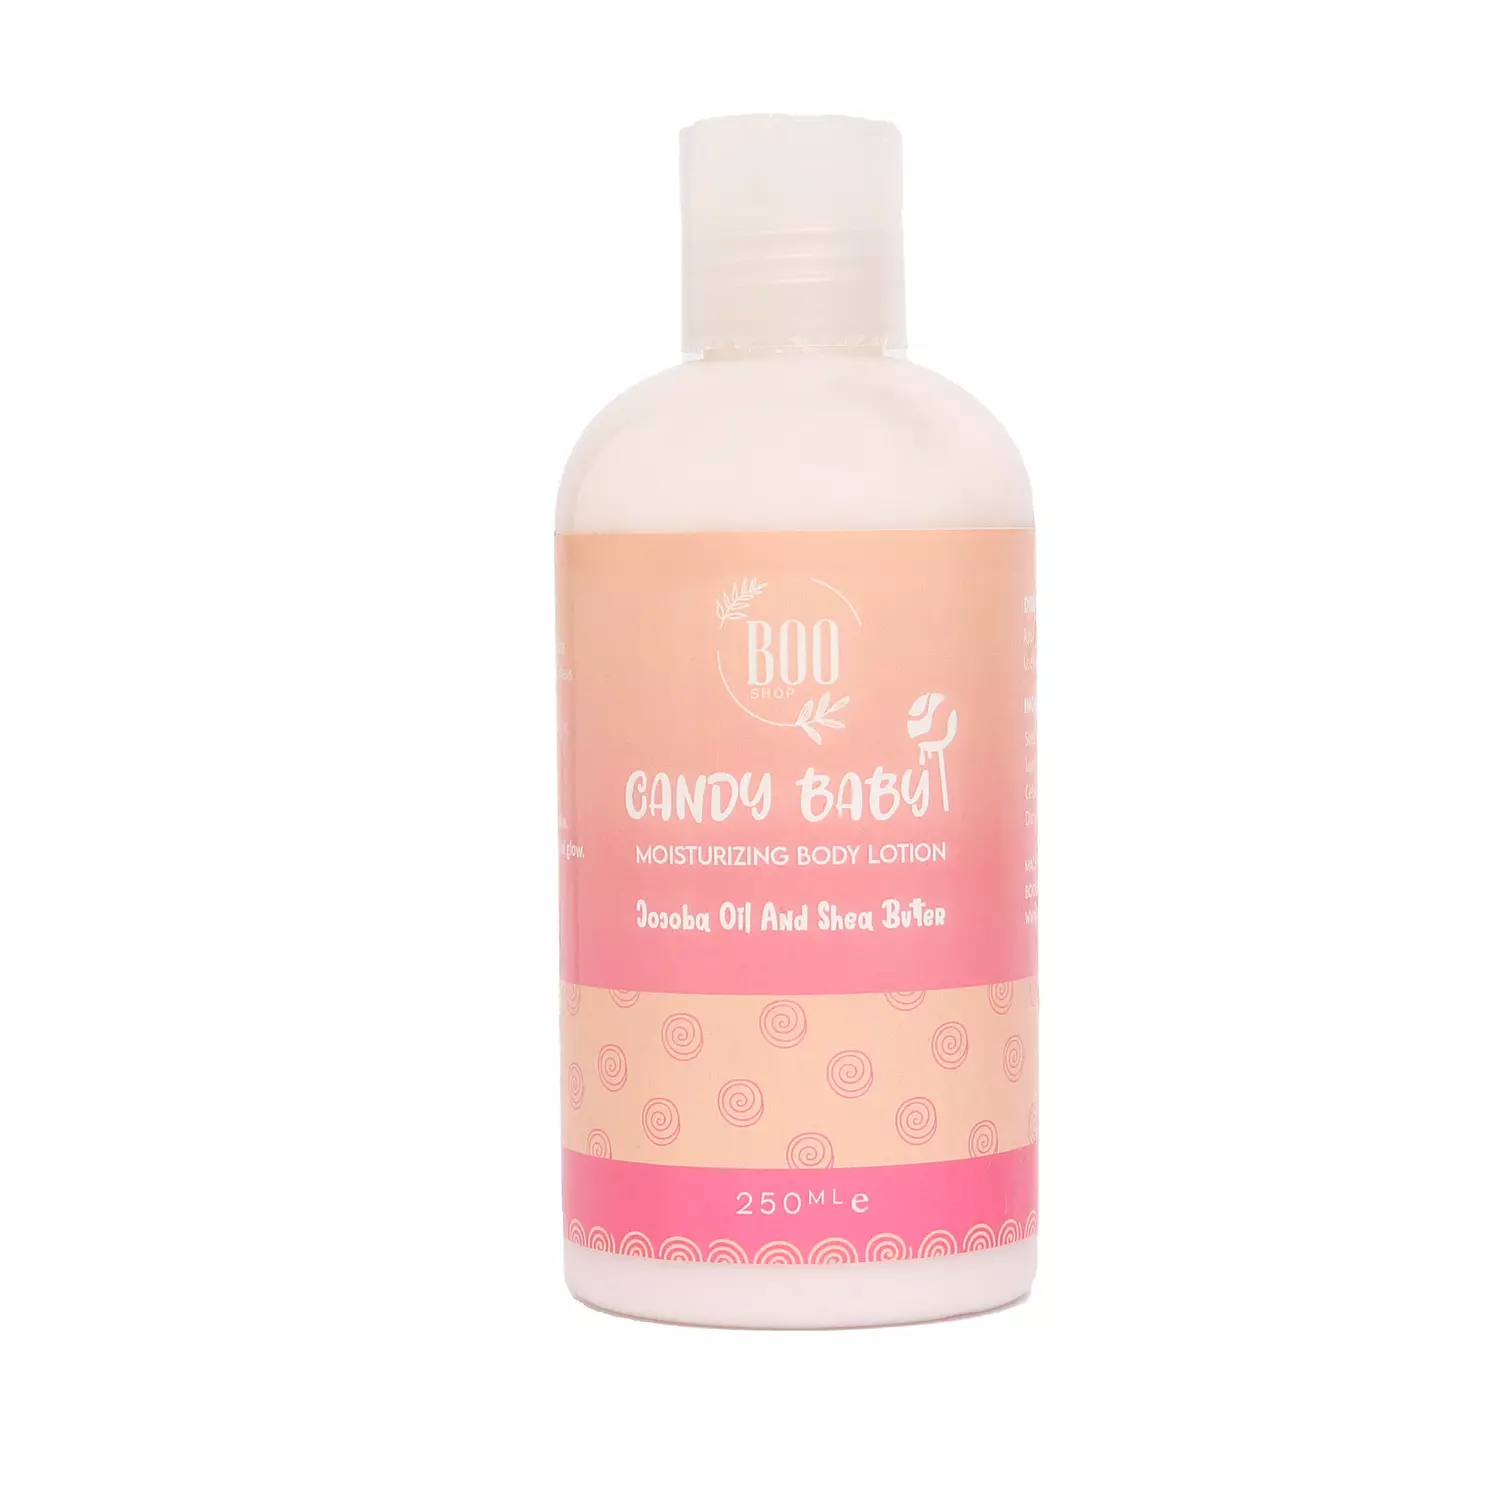 Candy baby body lotion hover image